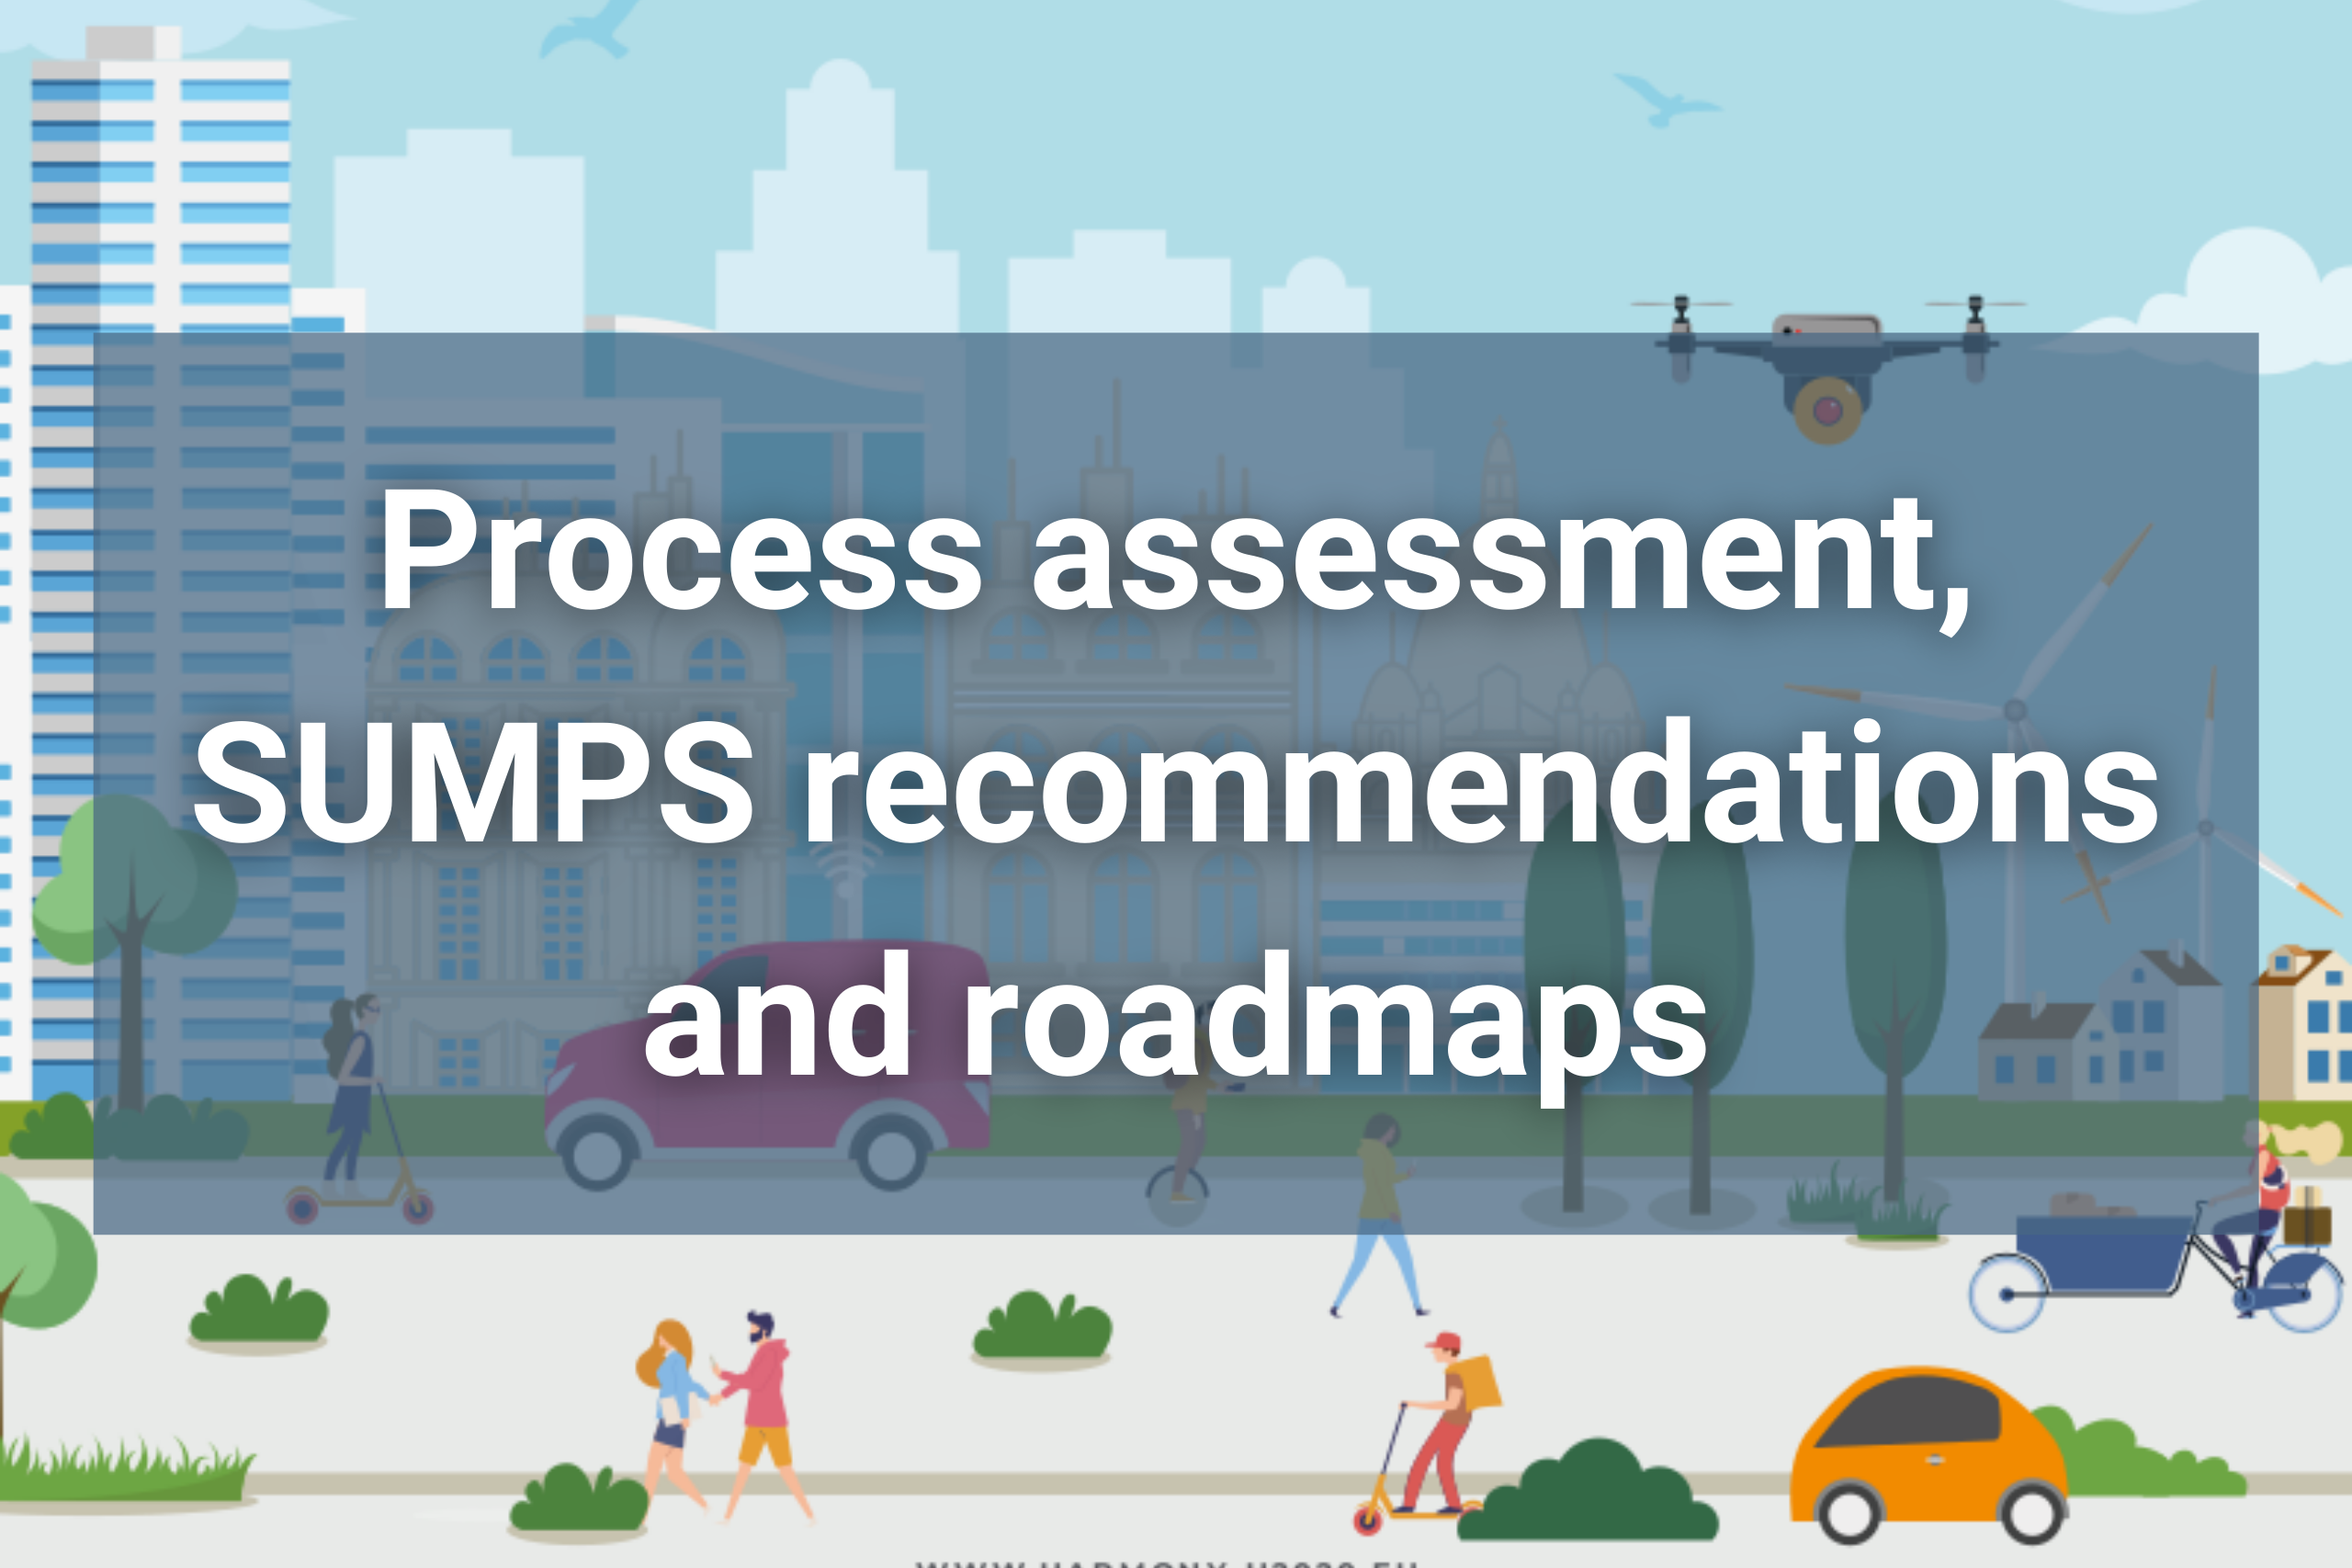 Process assessment, SUMPS recommendations and roadmaps